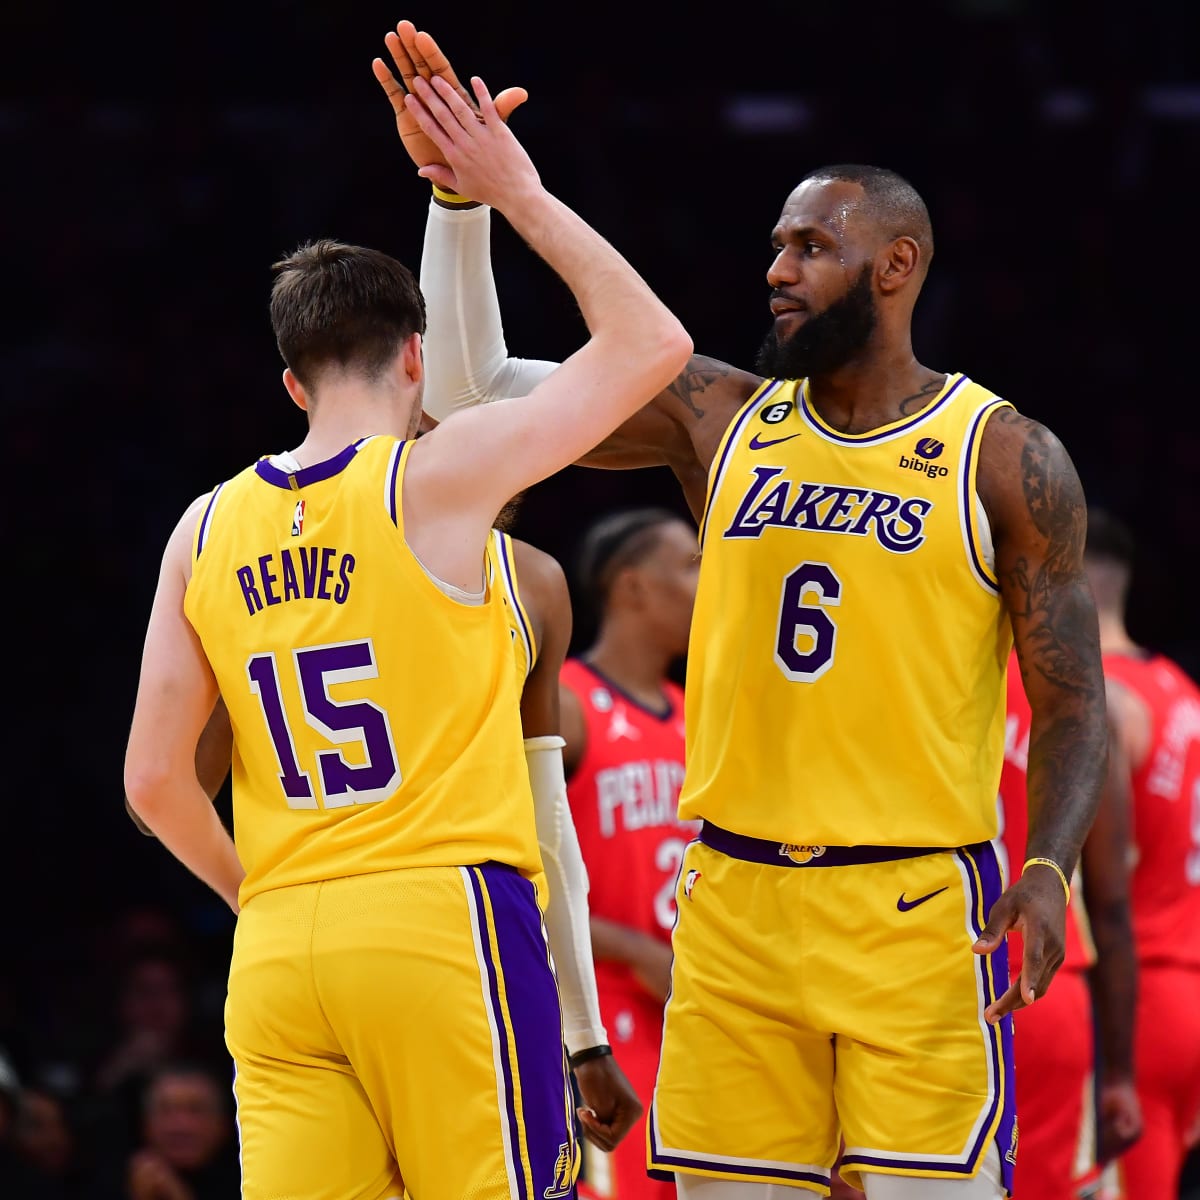 Lakers News: LeBron James Sends Generous Gift To Austin Reaves' Brother - All Lakers | News, Rumors, Videos, Schedule, Roster, Salaries And More